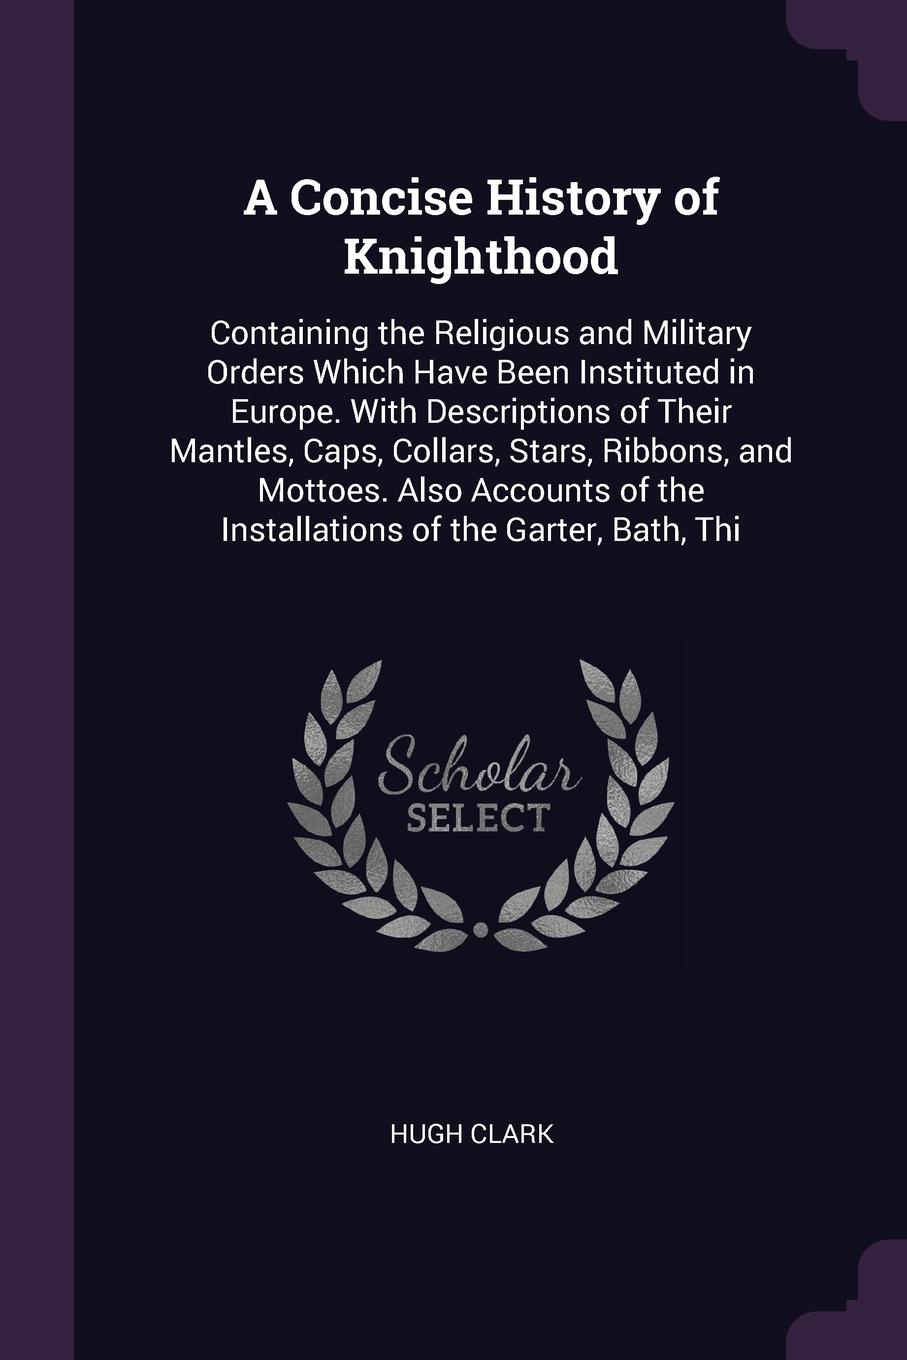 A Concise History of Knighthood. Containing the Religious and Military Orders Which Have Been Instituted in Europe. With Descriptions of Their Mantles, Caps, Collars, Stars, Ribbons, and Mottoes. Also Accounts of the Installations of the Garter, B...